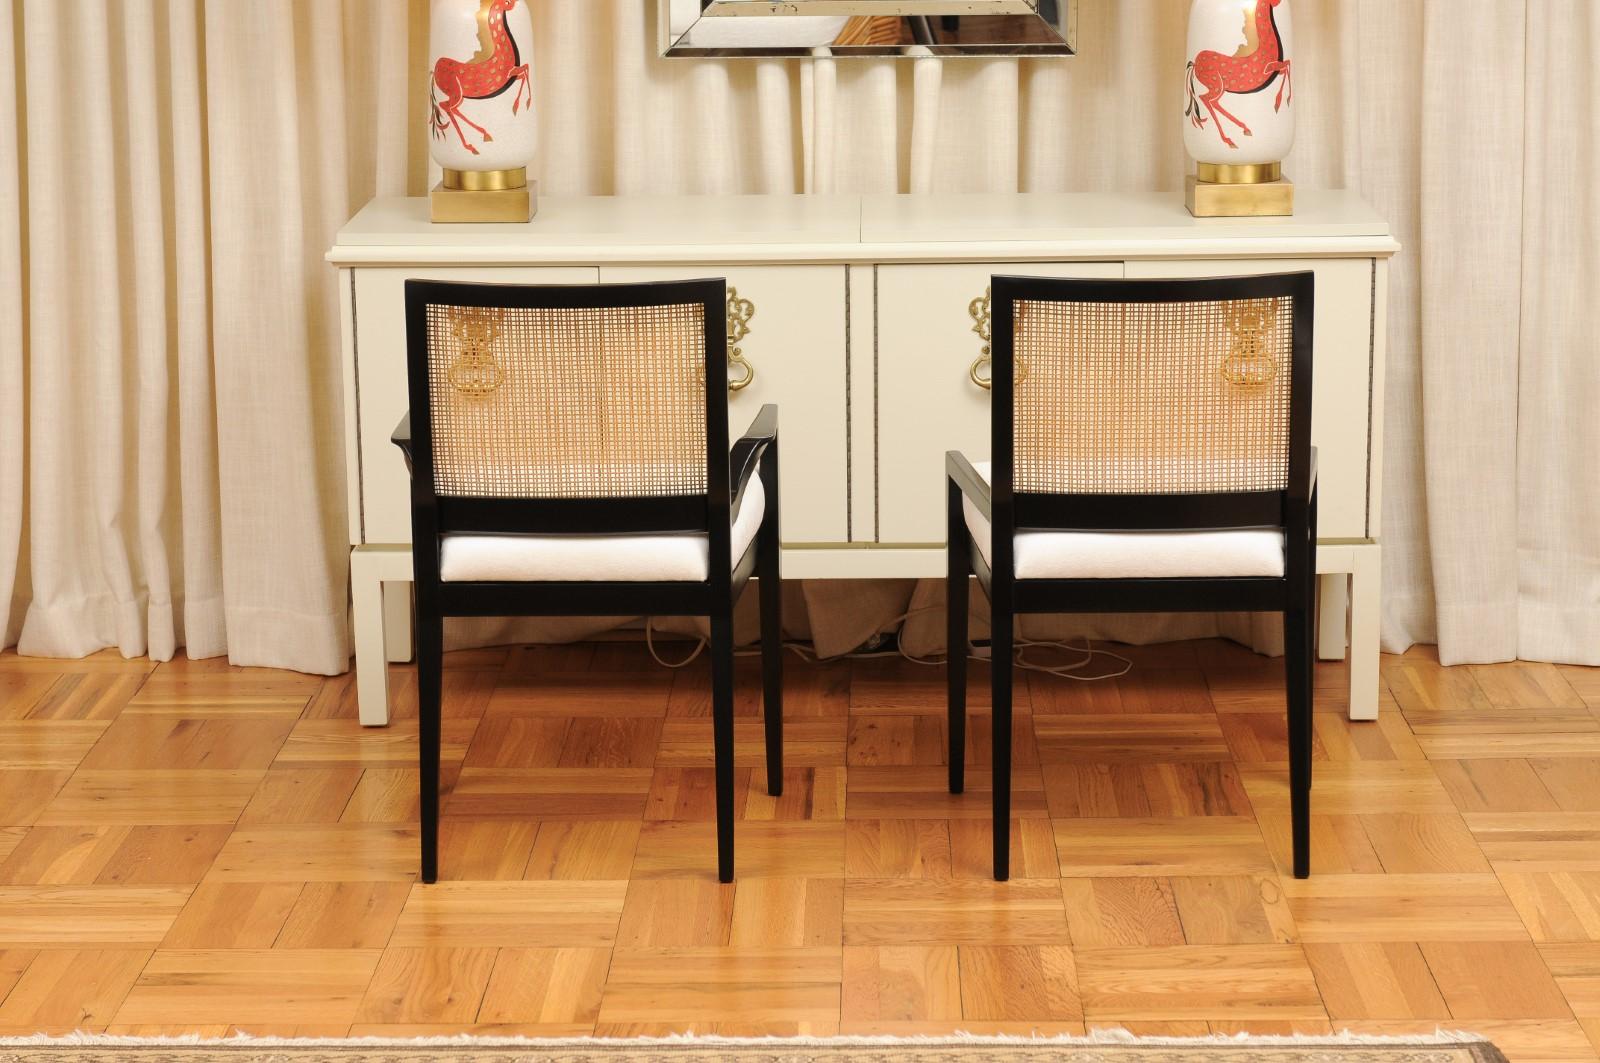 Stellar Set of 14 Black Lacquer Cane Chairs by Michael Taylor, circa 1960 For Sale 6